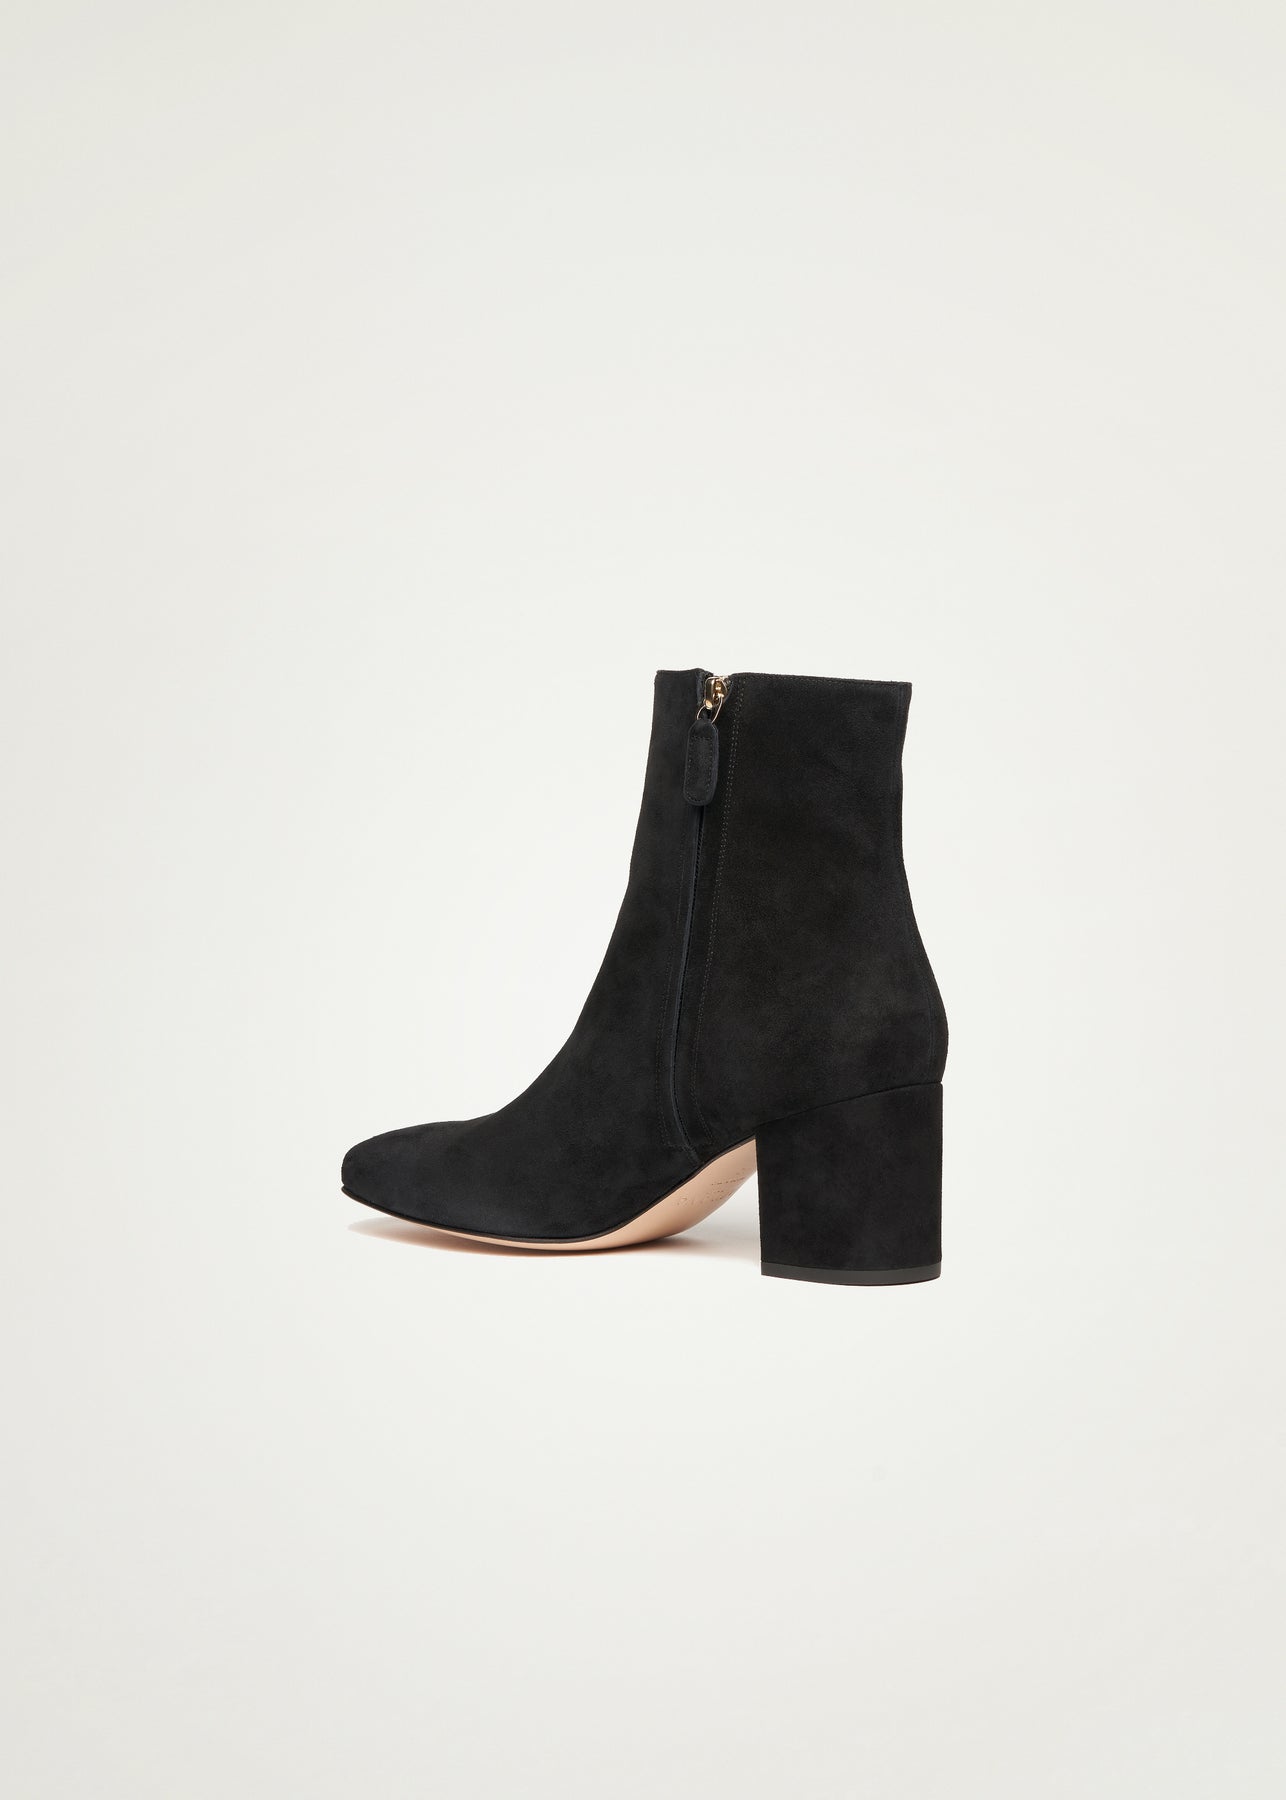 Sienna – Ankle boots in large sizes, suede, black | Miyana Berlin